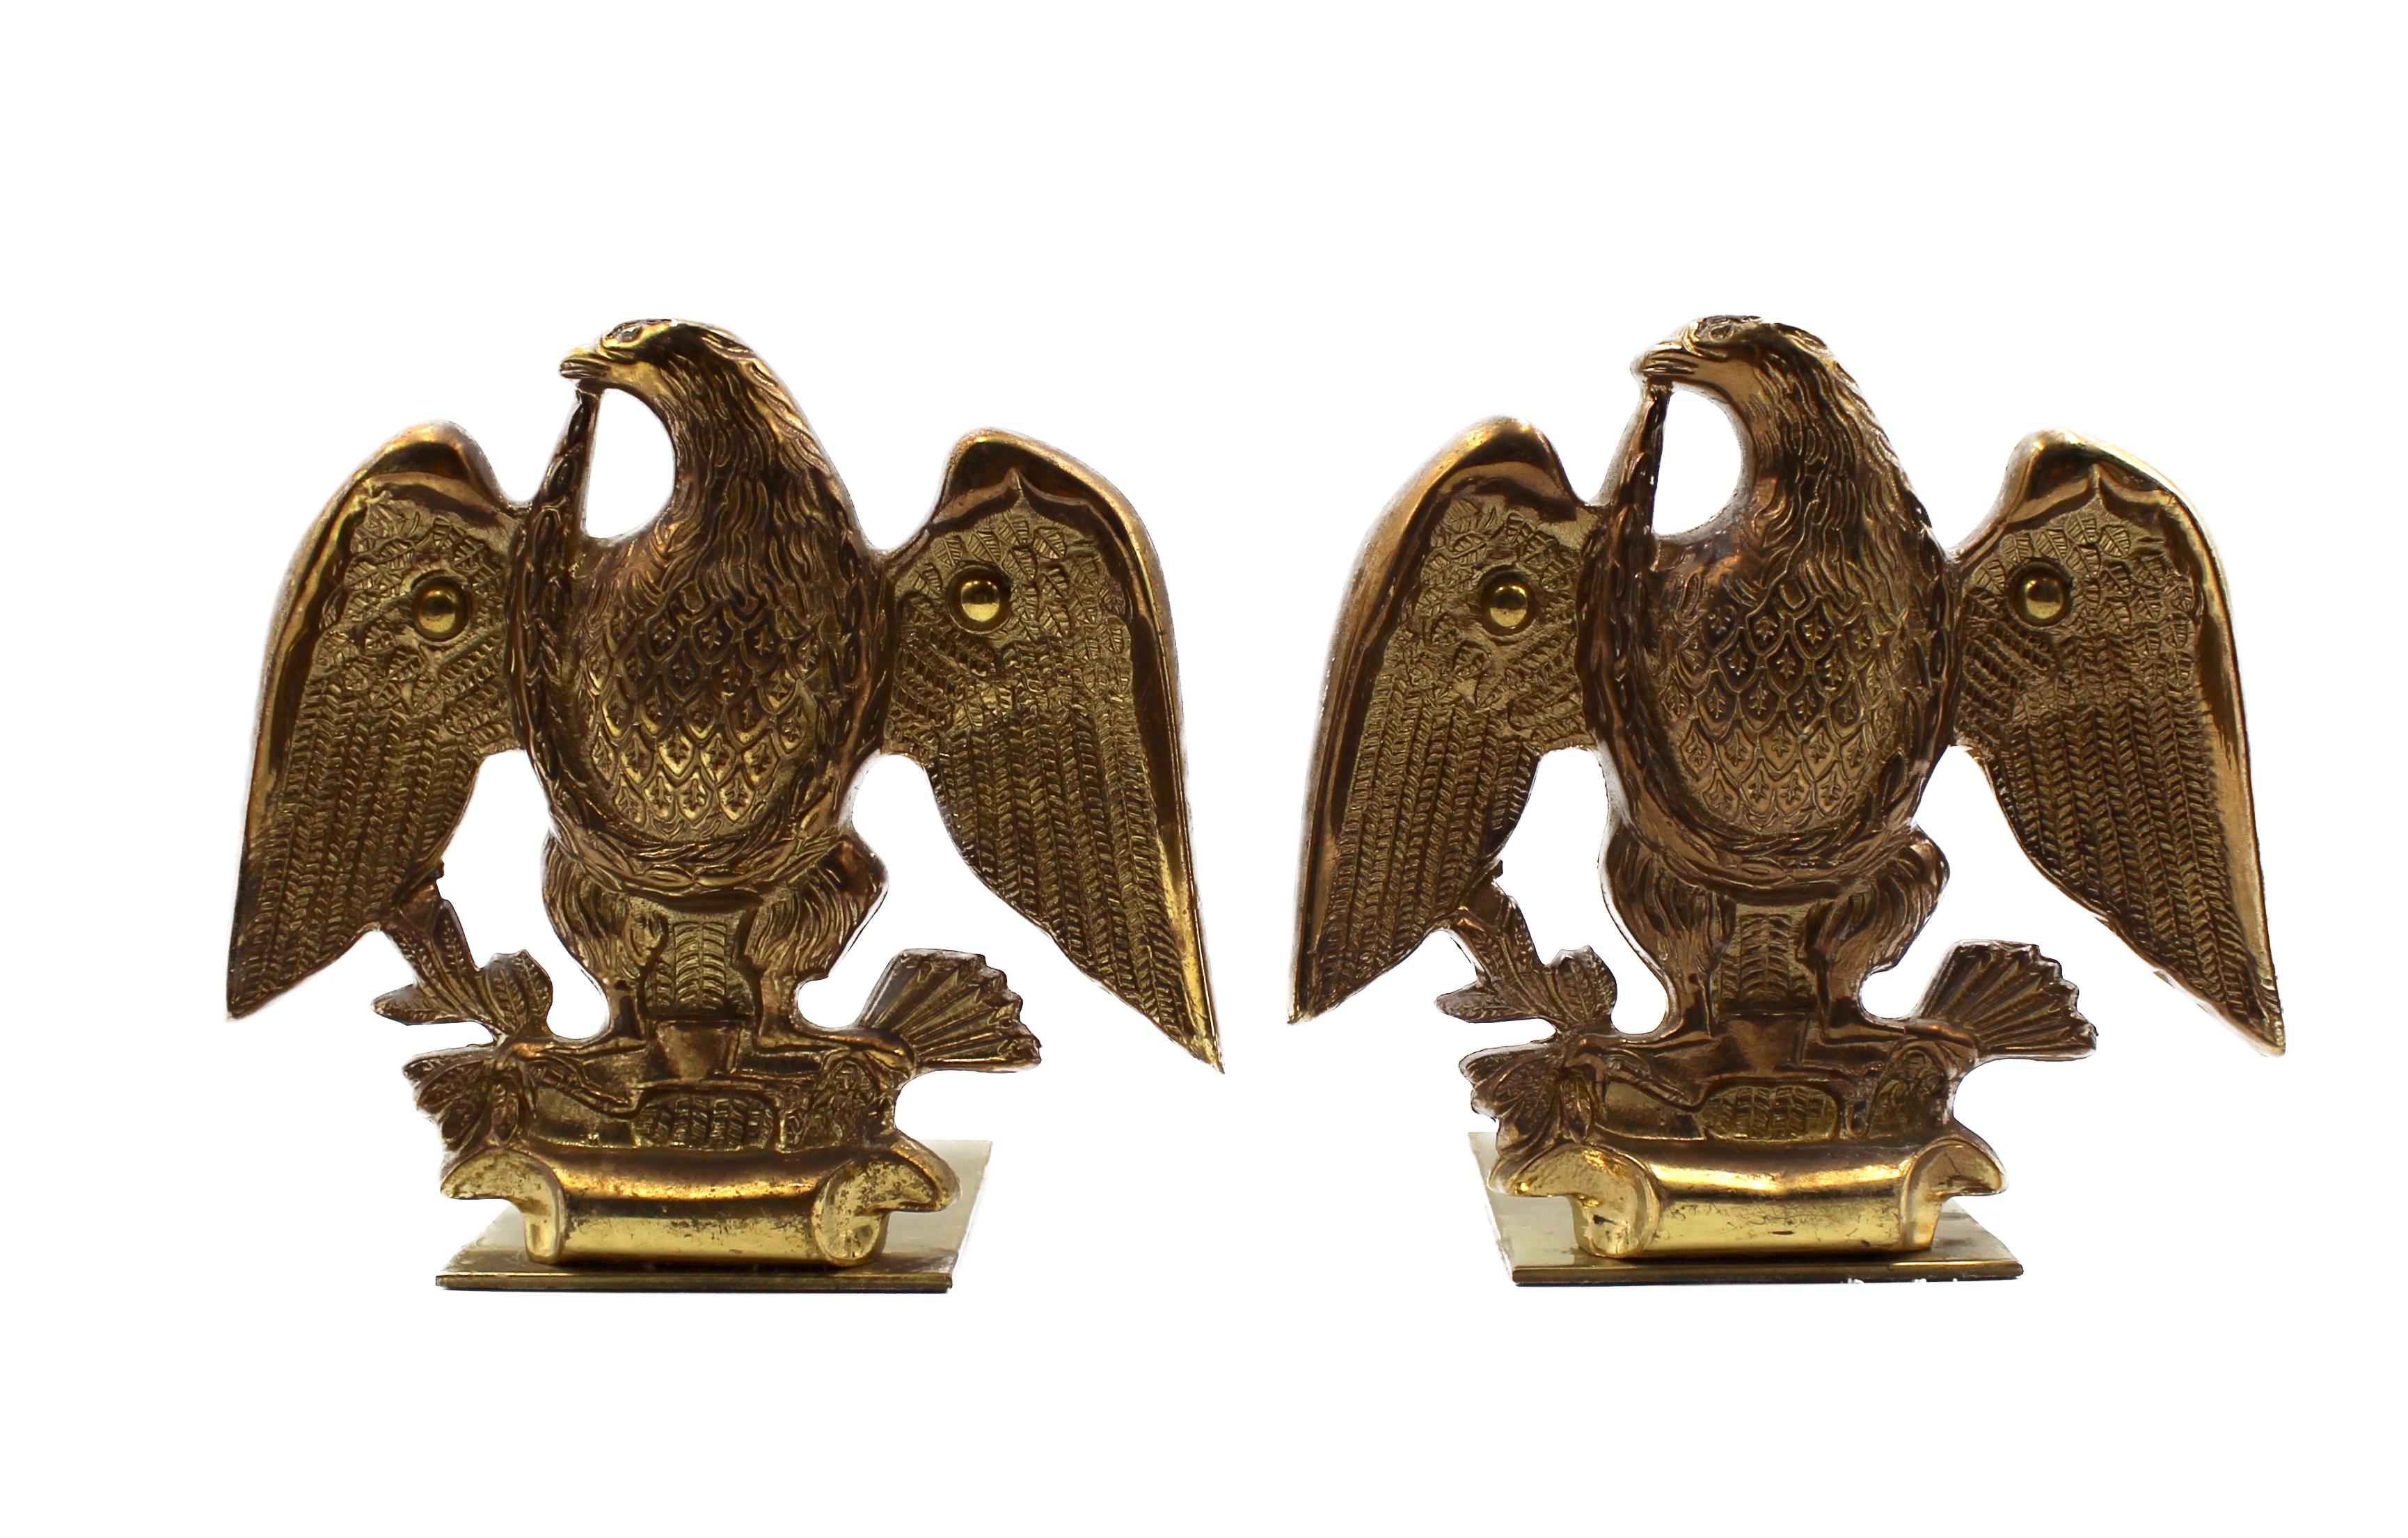 Offered is a set of vintage brass eagle bookends. Each bookend depicts a wingspread eagle clutching a bundle of arrows in its left talon and an olive branch in the right talon. When set against books, the base of the bookends slips underneath and